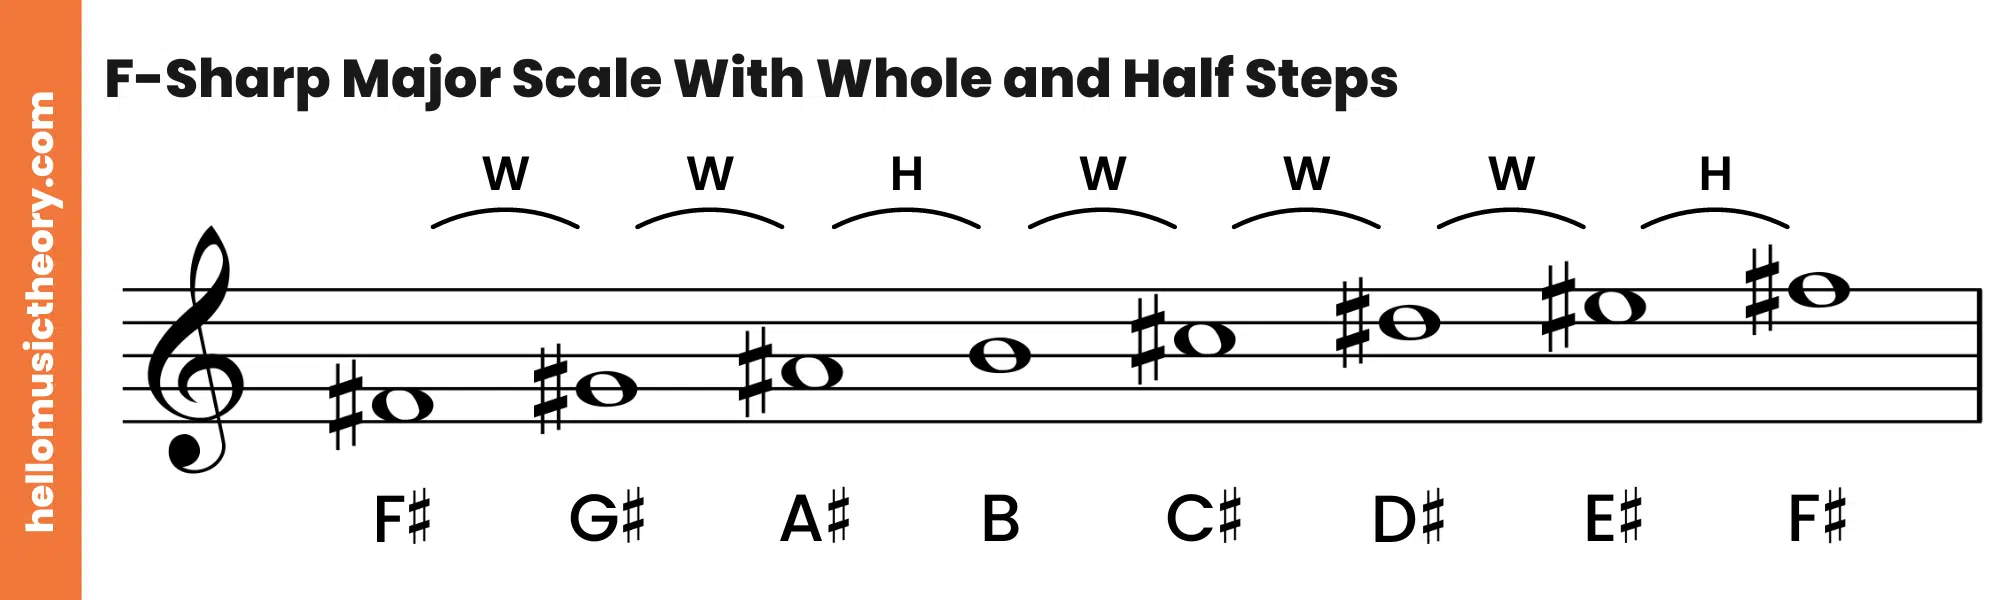 F-Sharp Major Scale Treble Clef With Whole and Half Steps